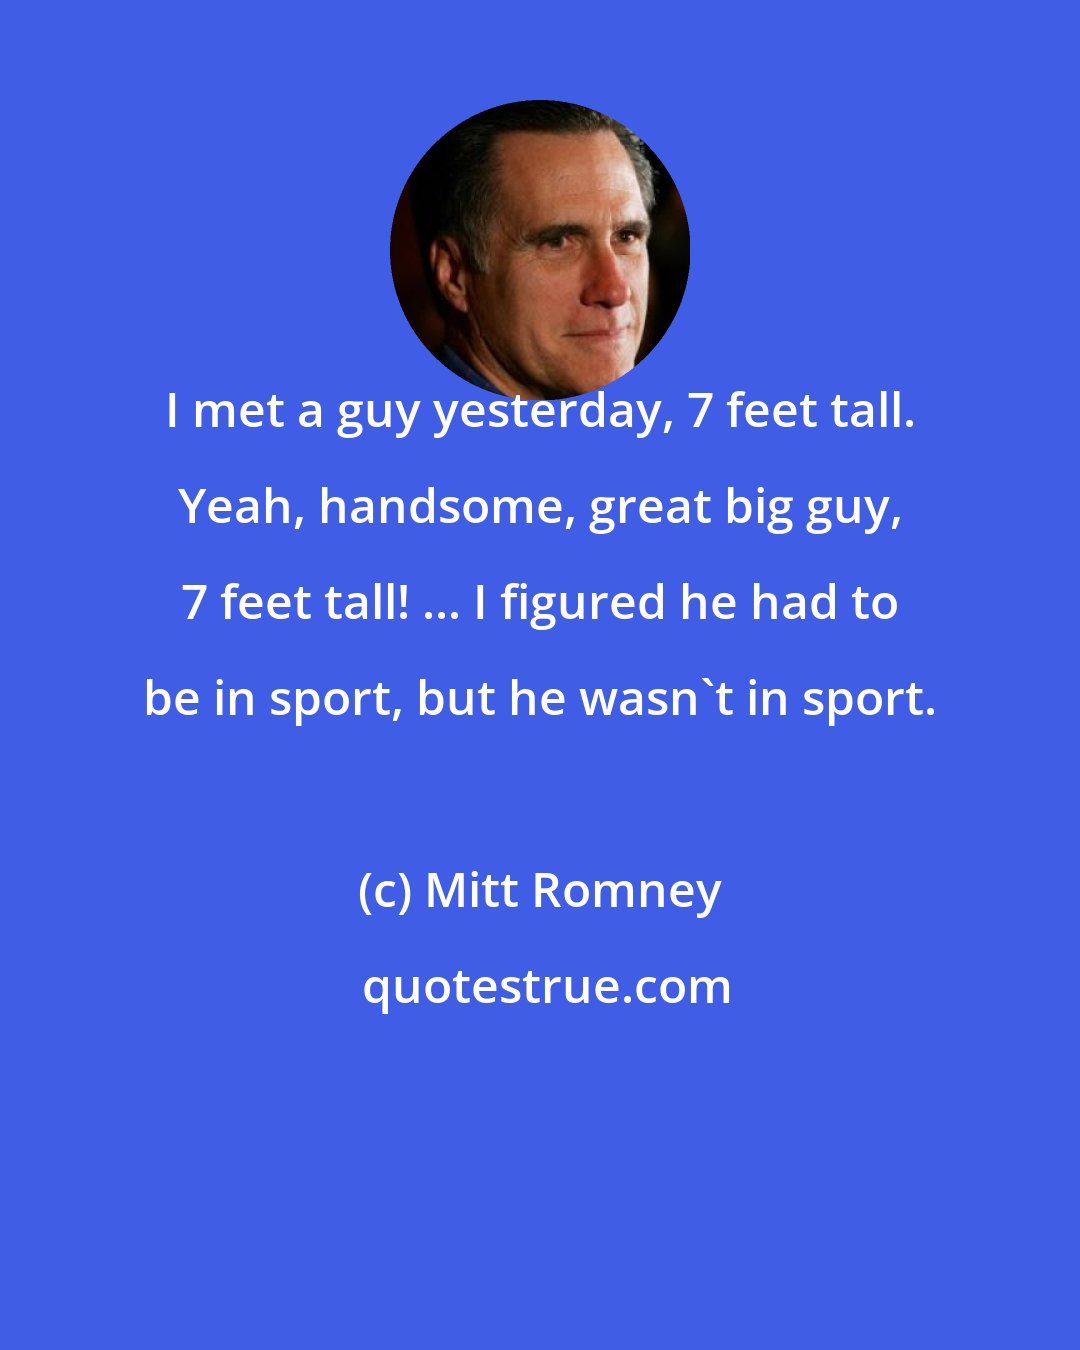 Mitt Romney: I met a guy yesterday, 7 feet tall. Yeah, handsome, great big guy, 7 feet tall! ... I figured he had to be in sport, but he wasn't in sport.